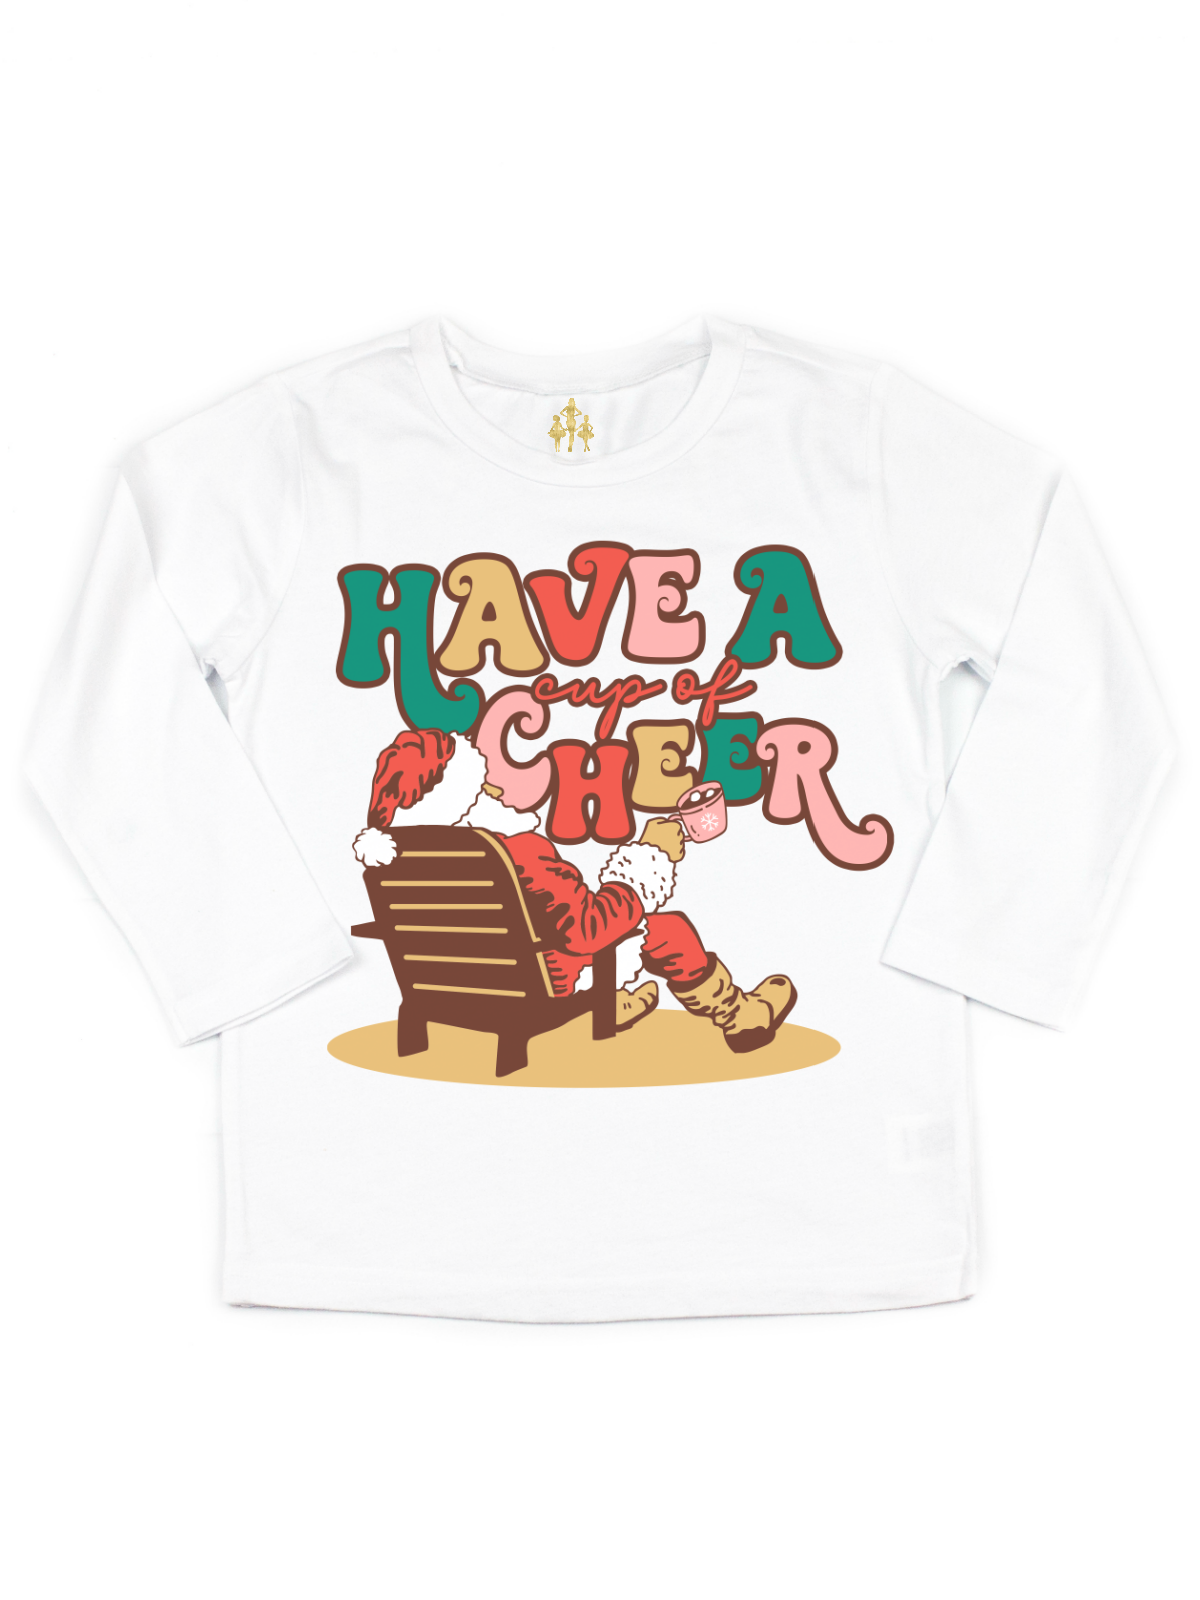 Have a Cup of Cheer Kids Christmas Shirt